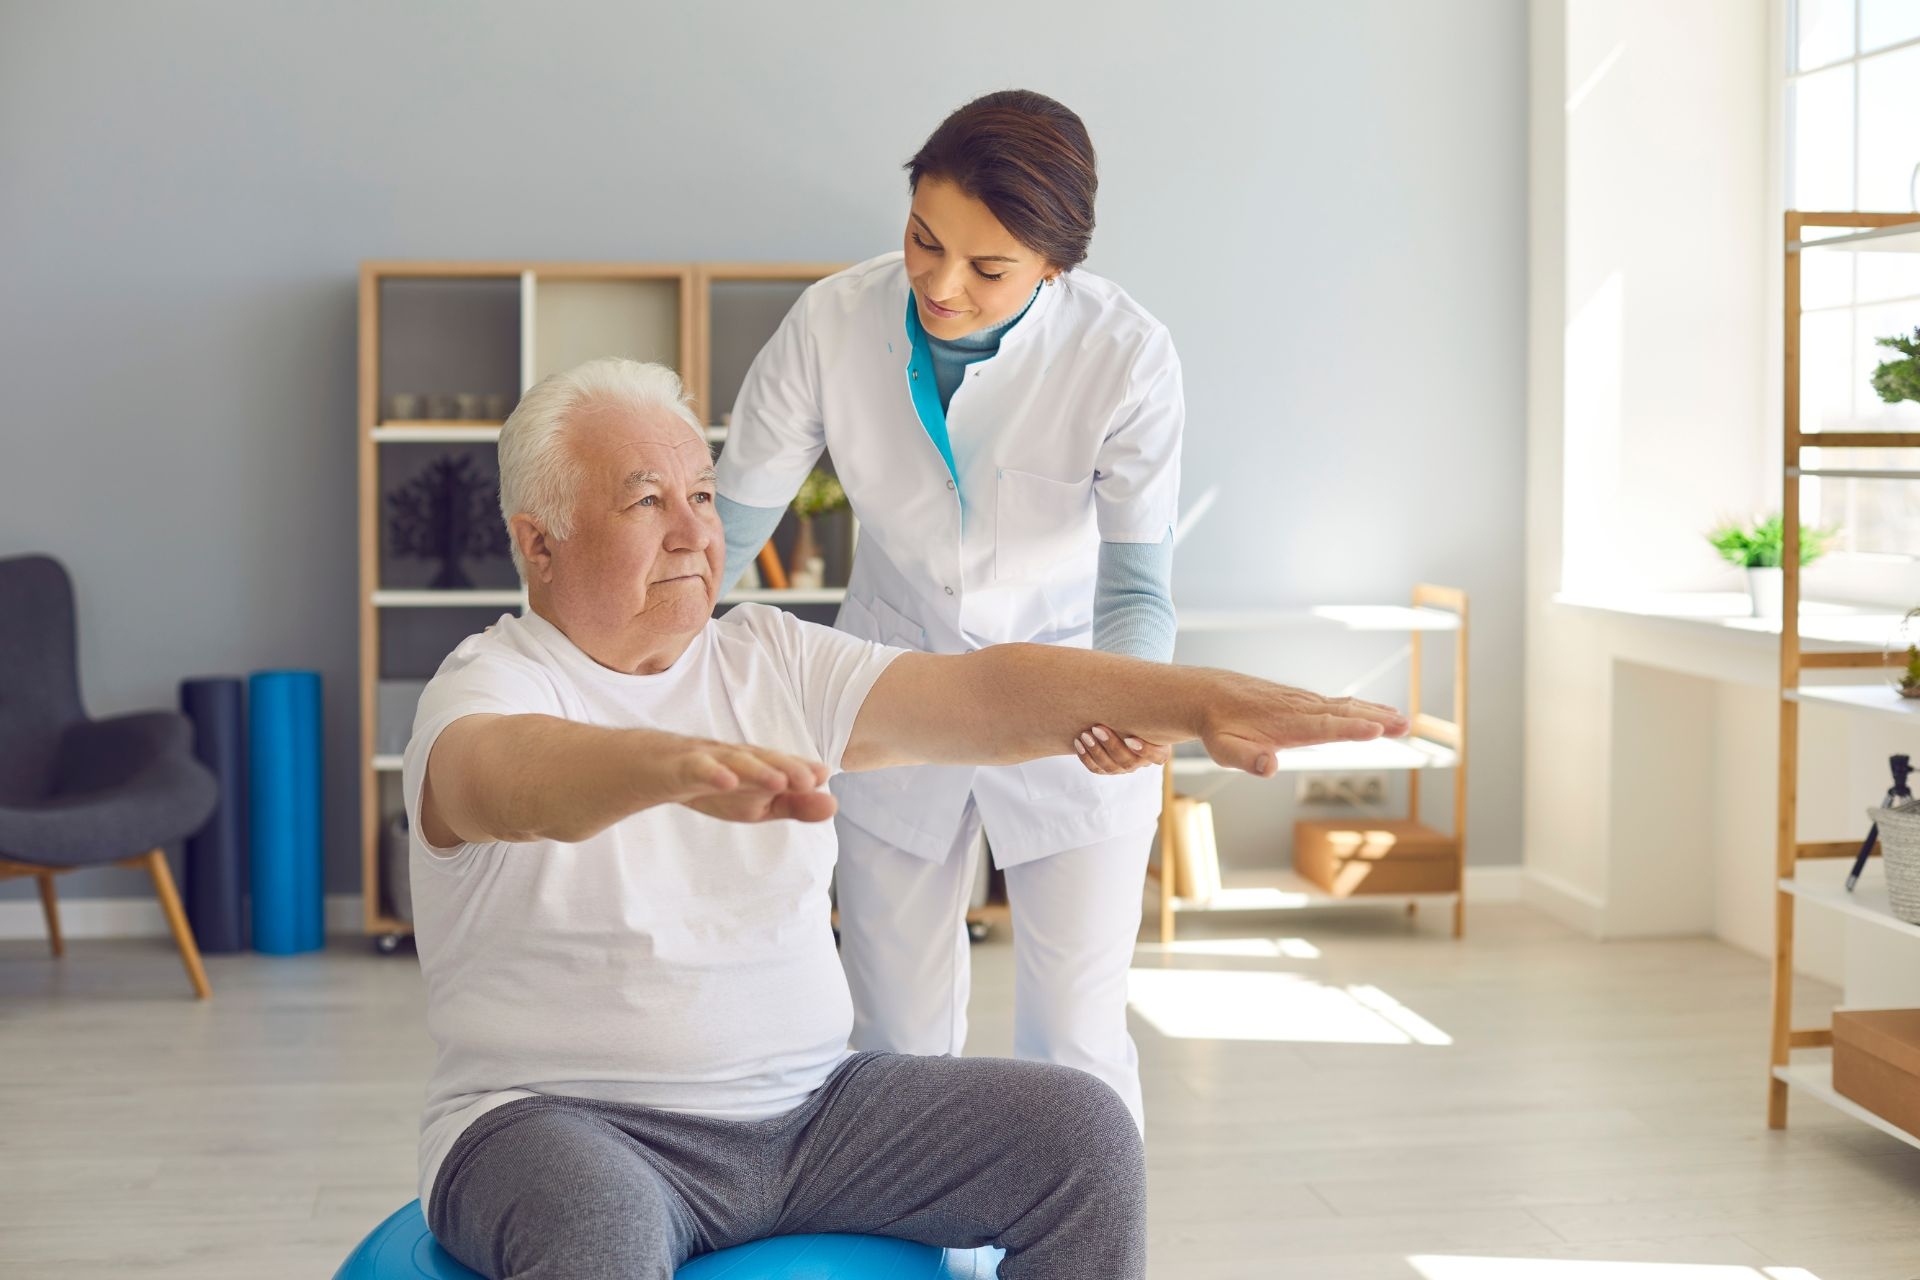 Are there any precautions or contraindications for practicing Tai Chi for rehabilitation?